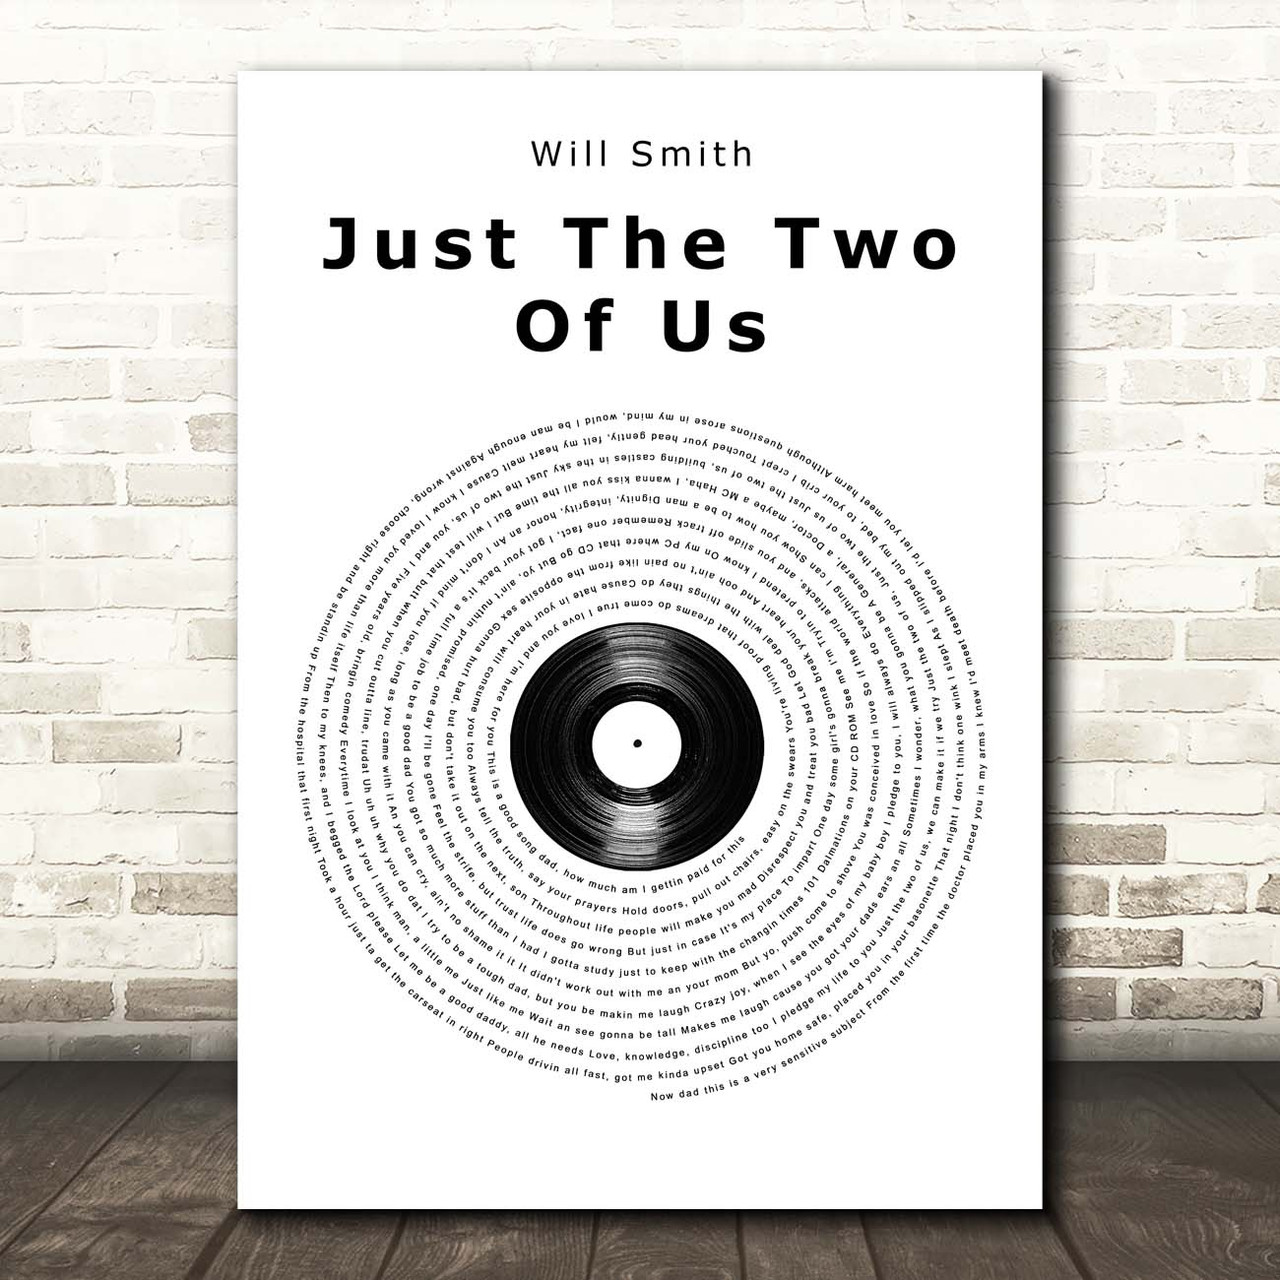 Just The Two of Us (lyrics) - Will Smith 